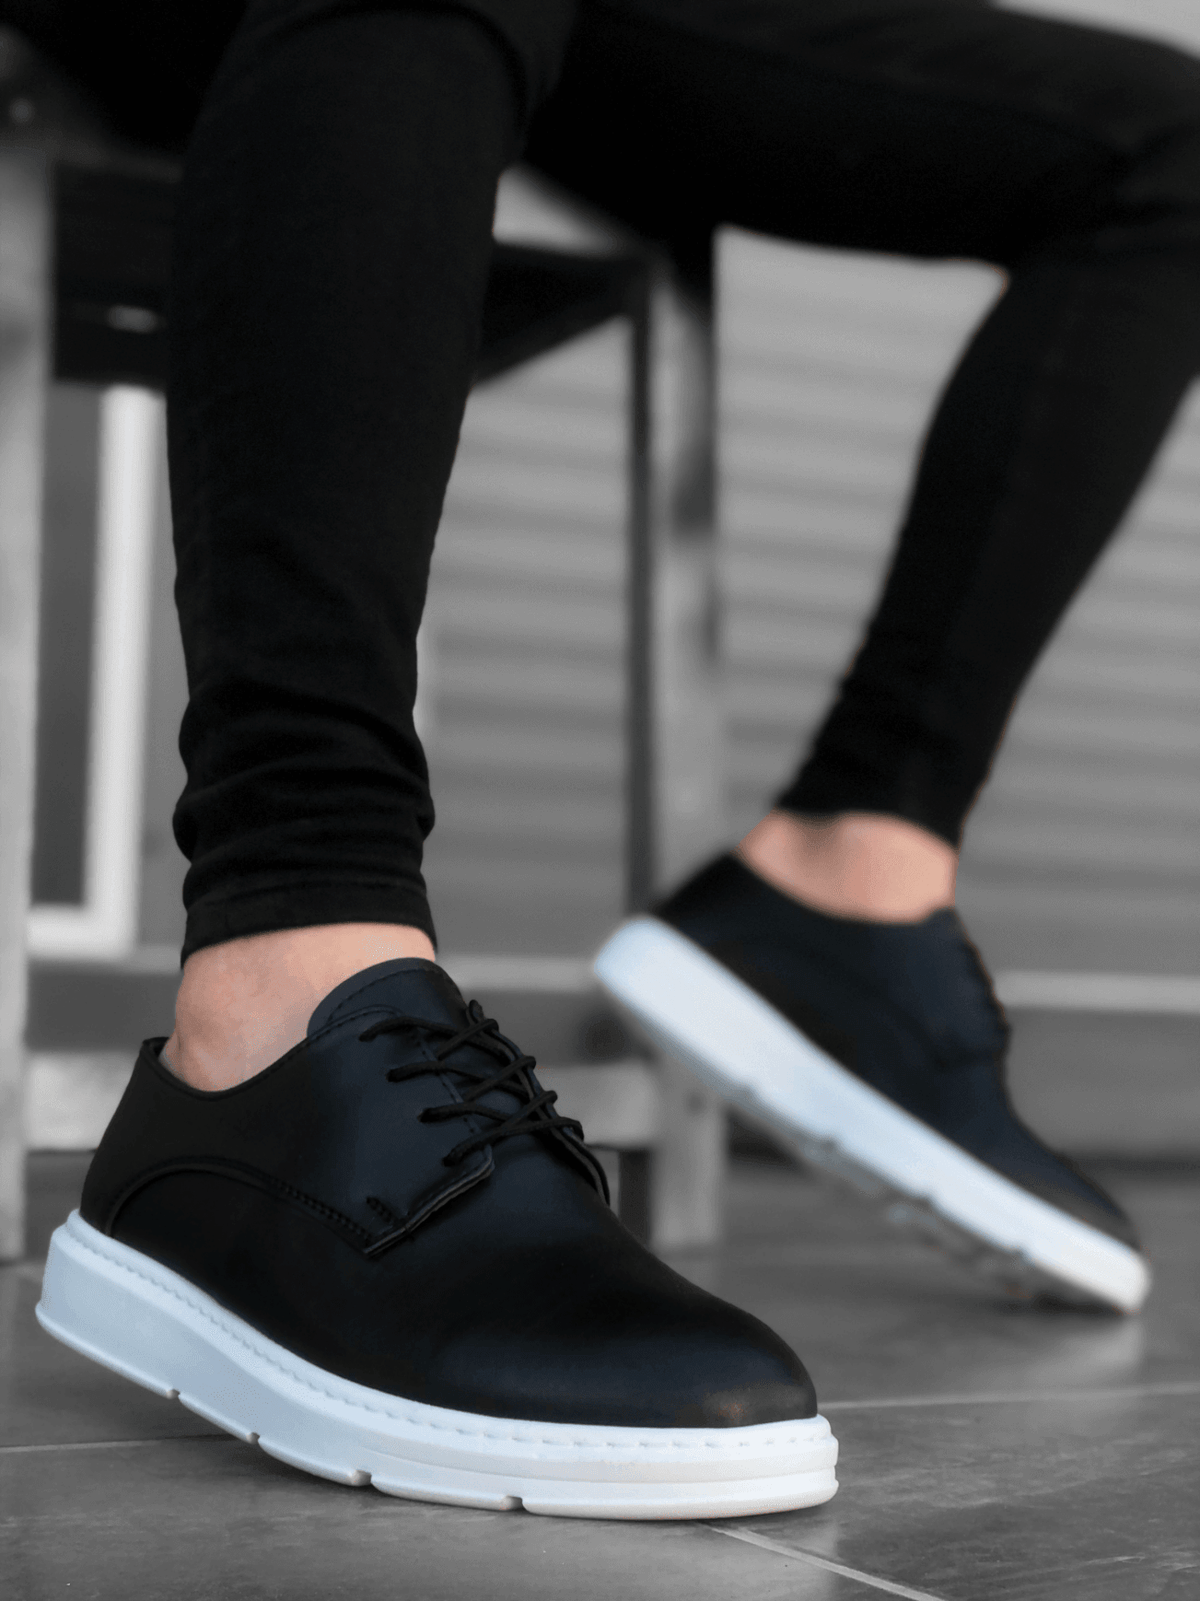 BA0003 Lace-Up Classic Black White High Sole Casual Men's Shoes - STREET MODE ™